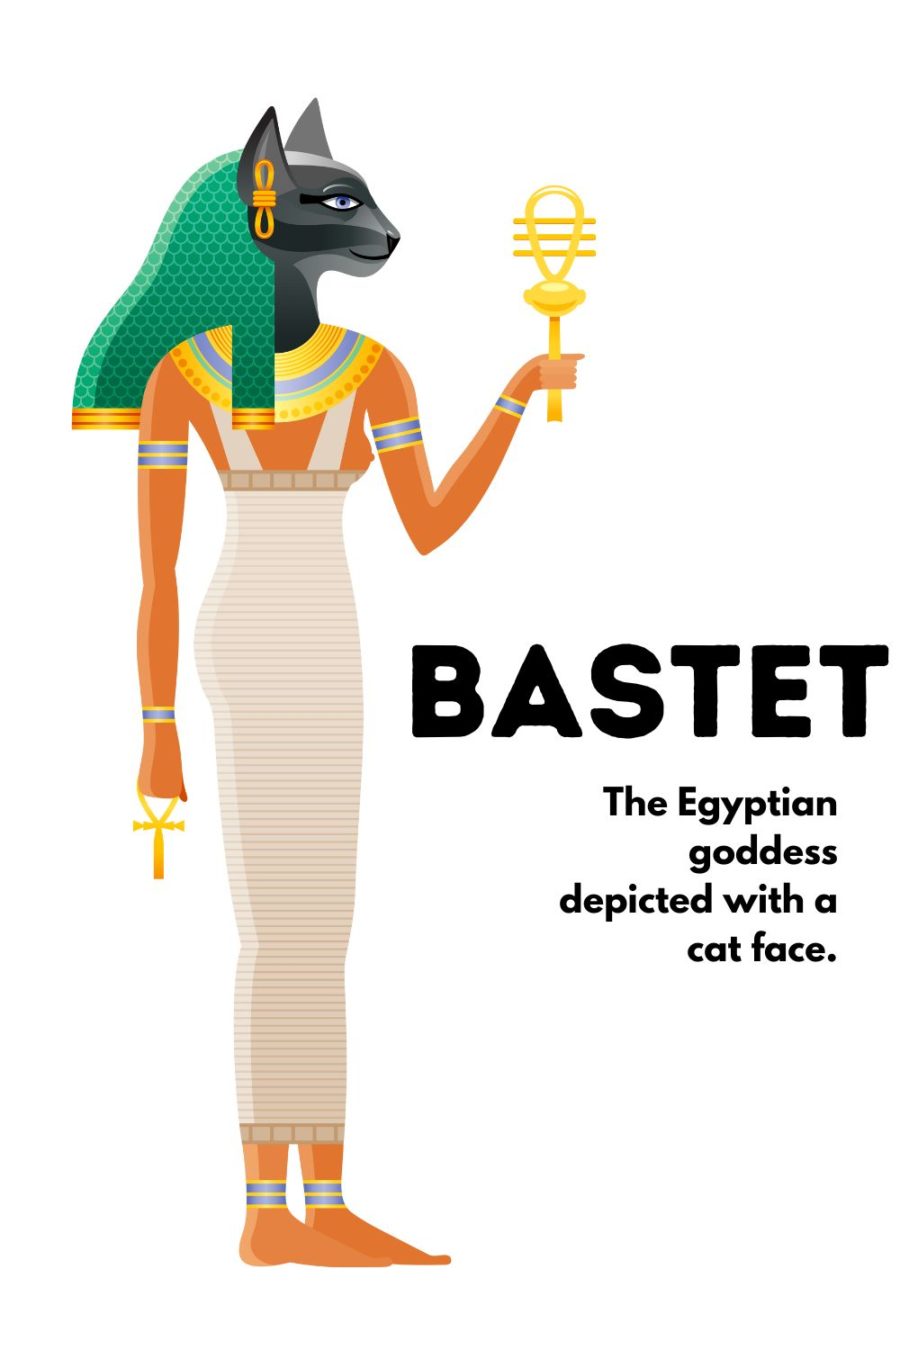 Bastet, the Egyptian goddess depicted with a cat face